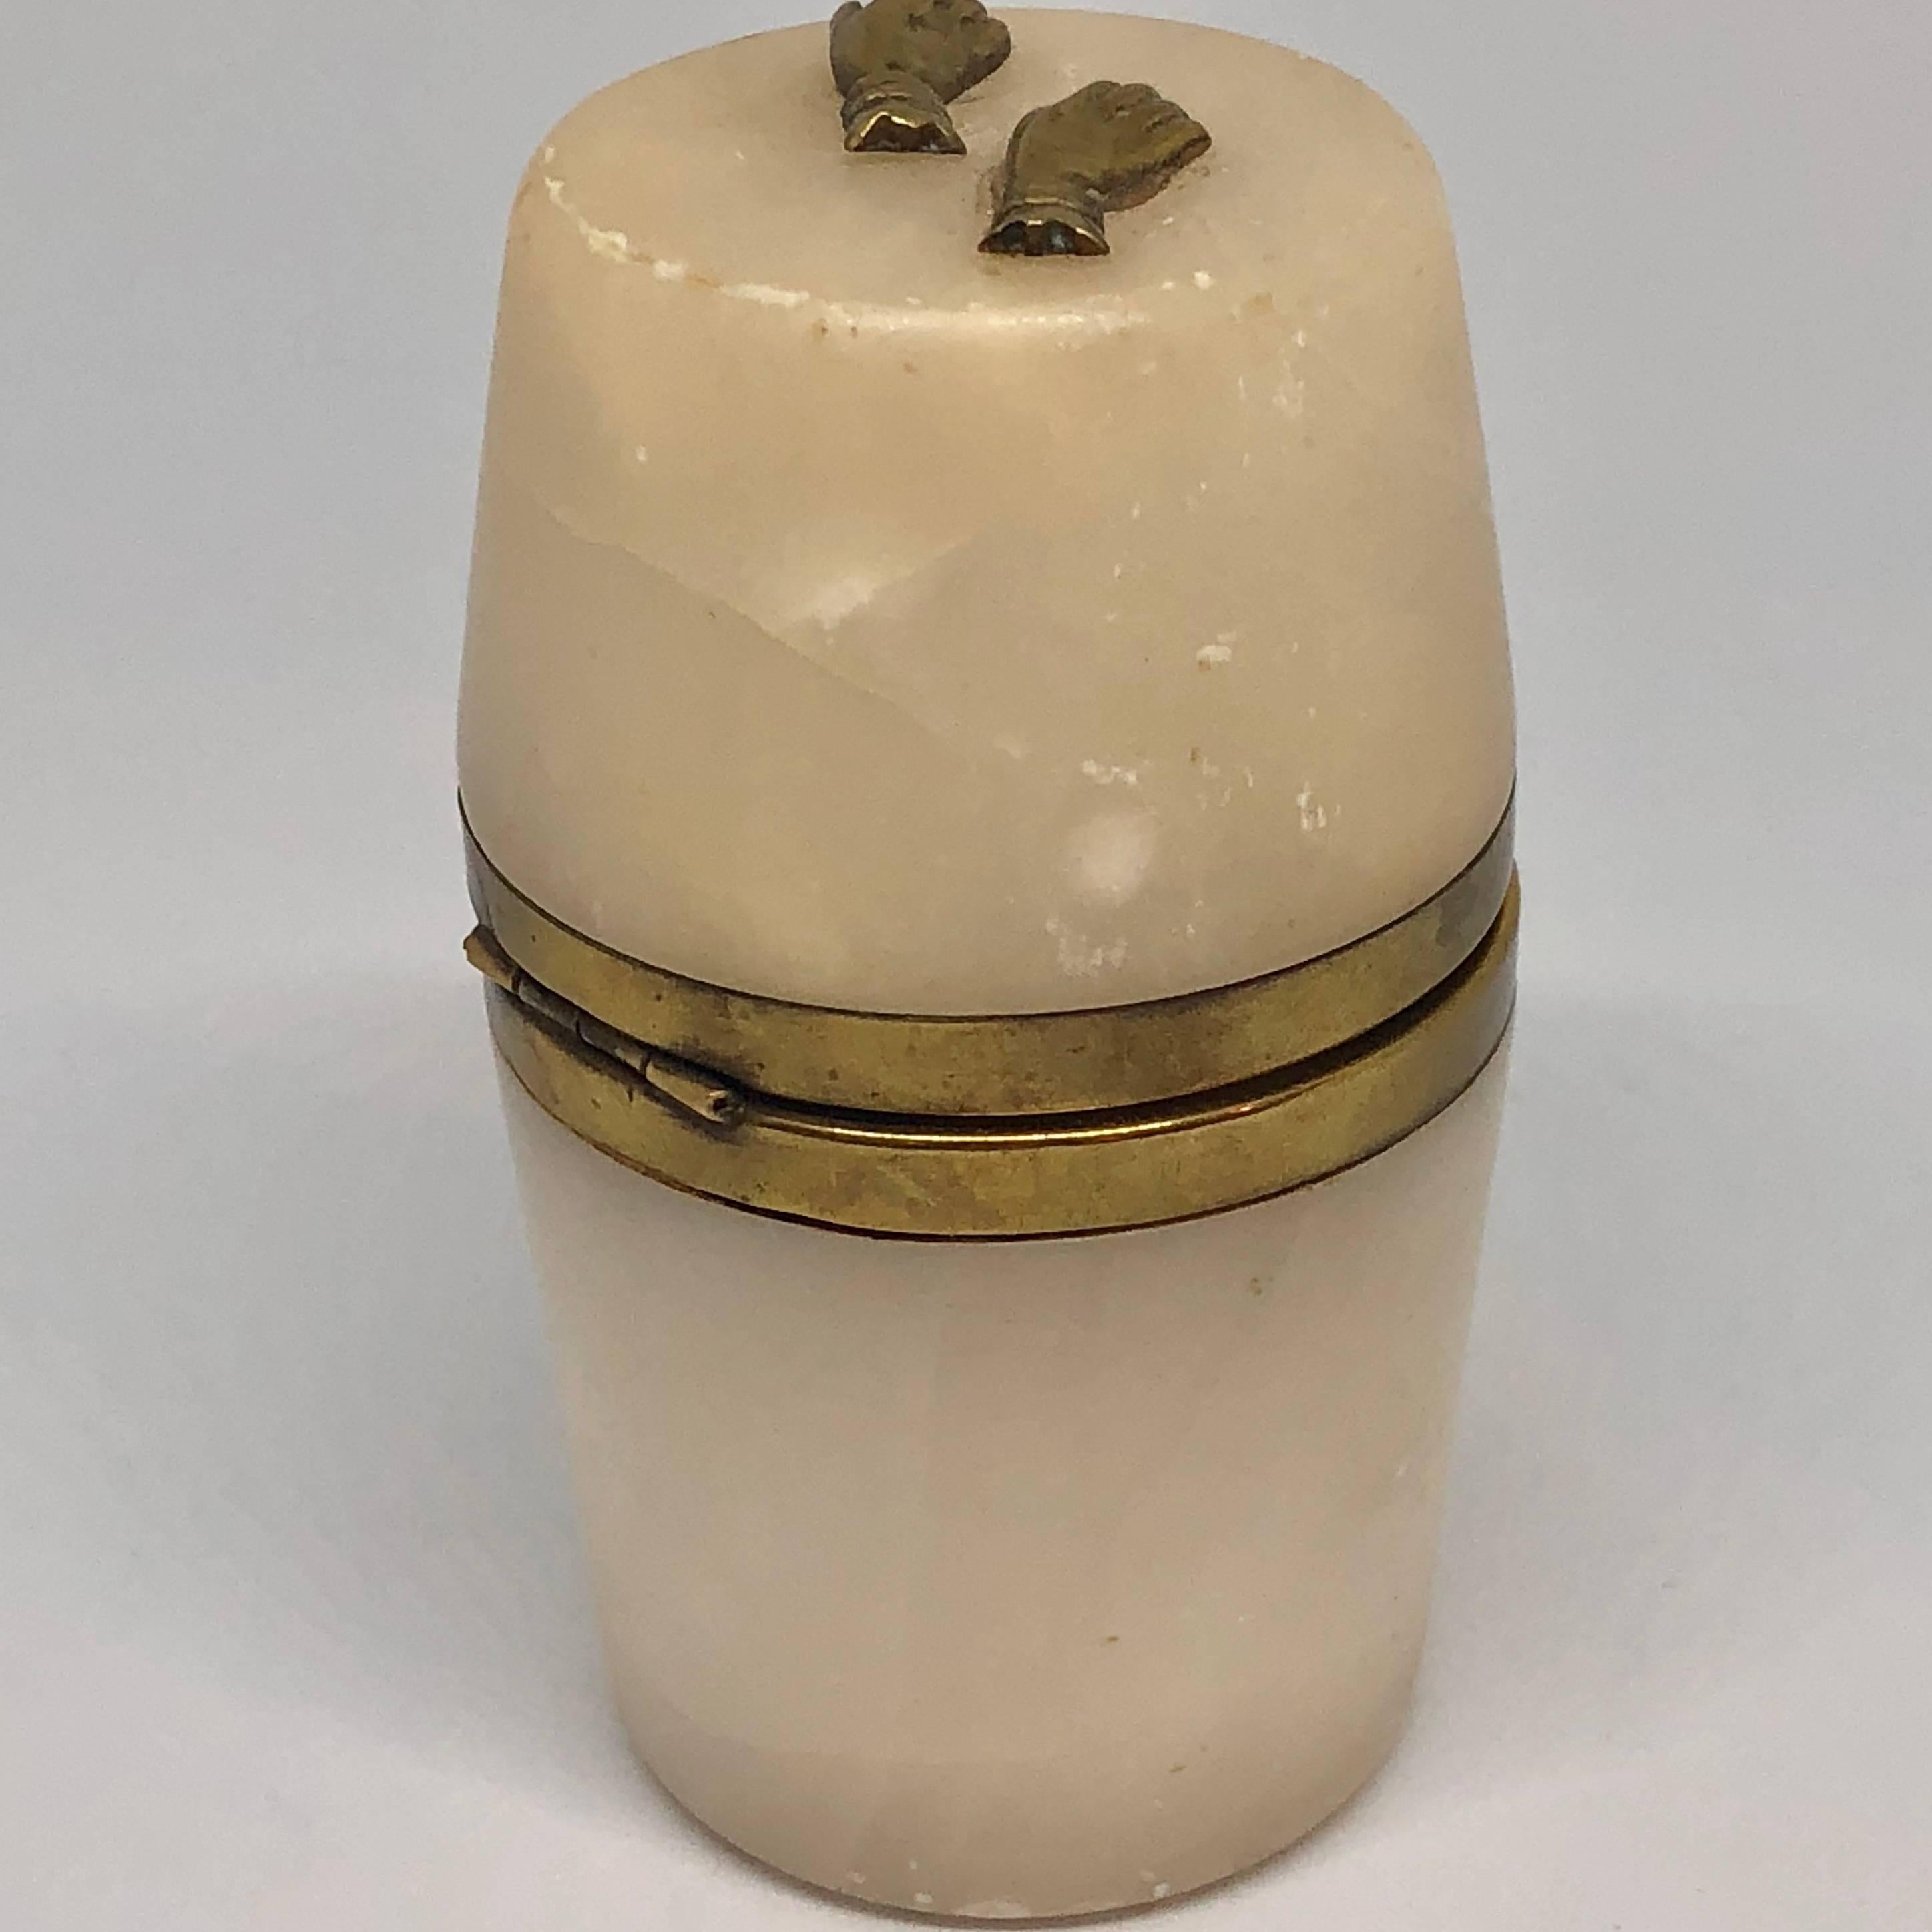 Hand-Crafted Small 18th Century Alabaster Barrel Shaped Jewelry Box W/ Brass Hands Decor For Sale